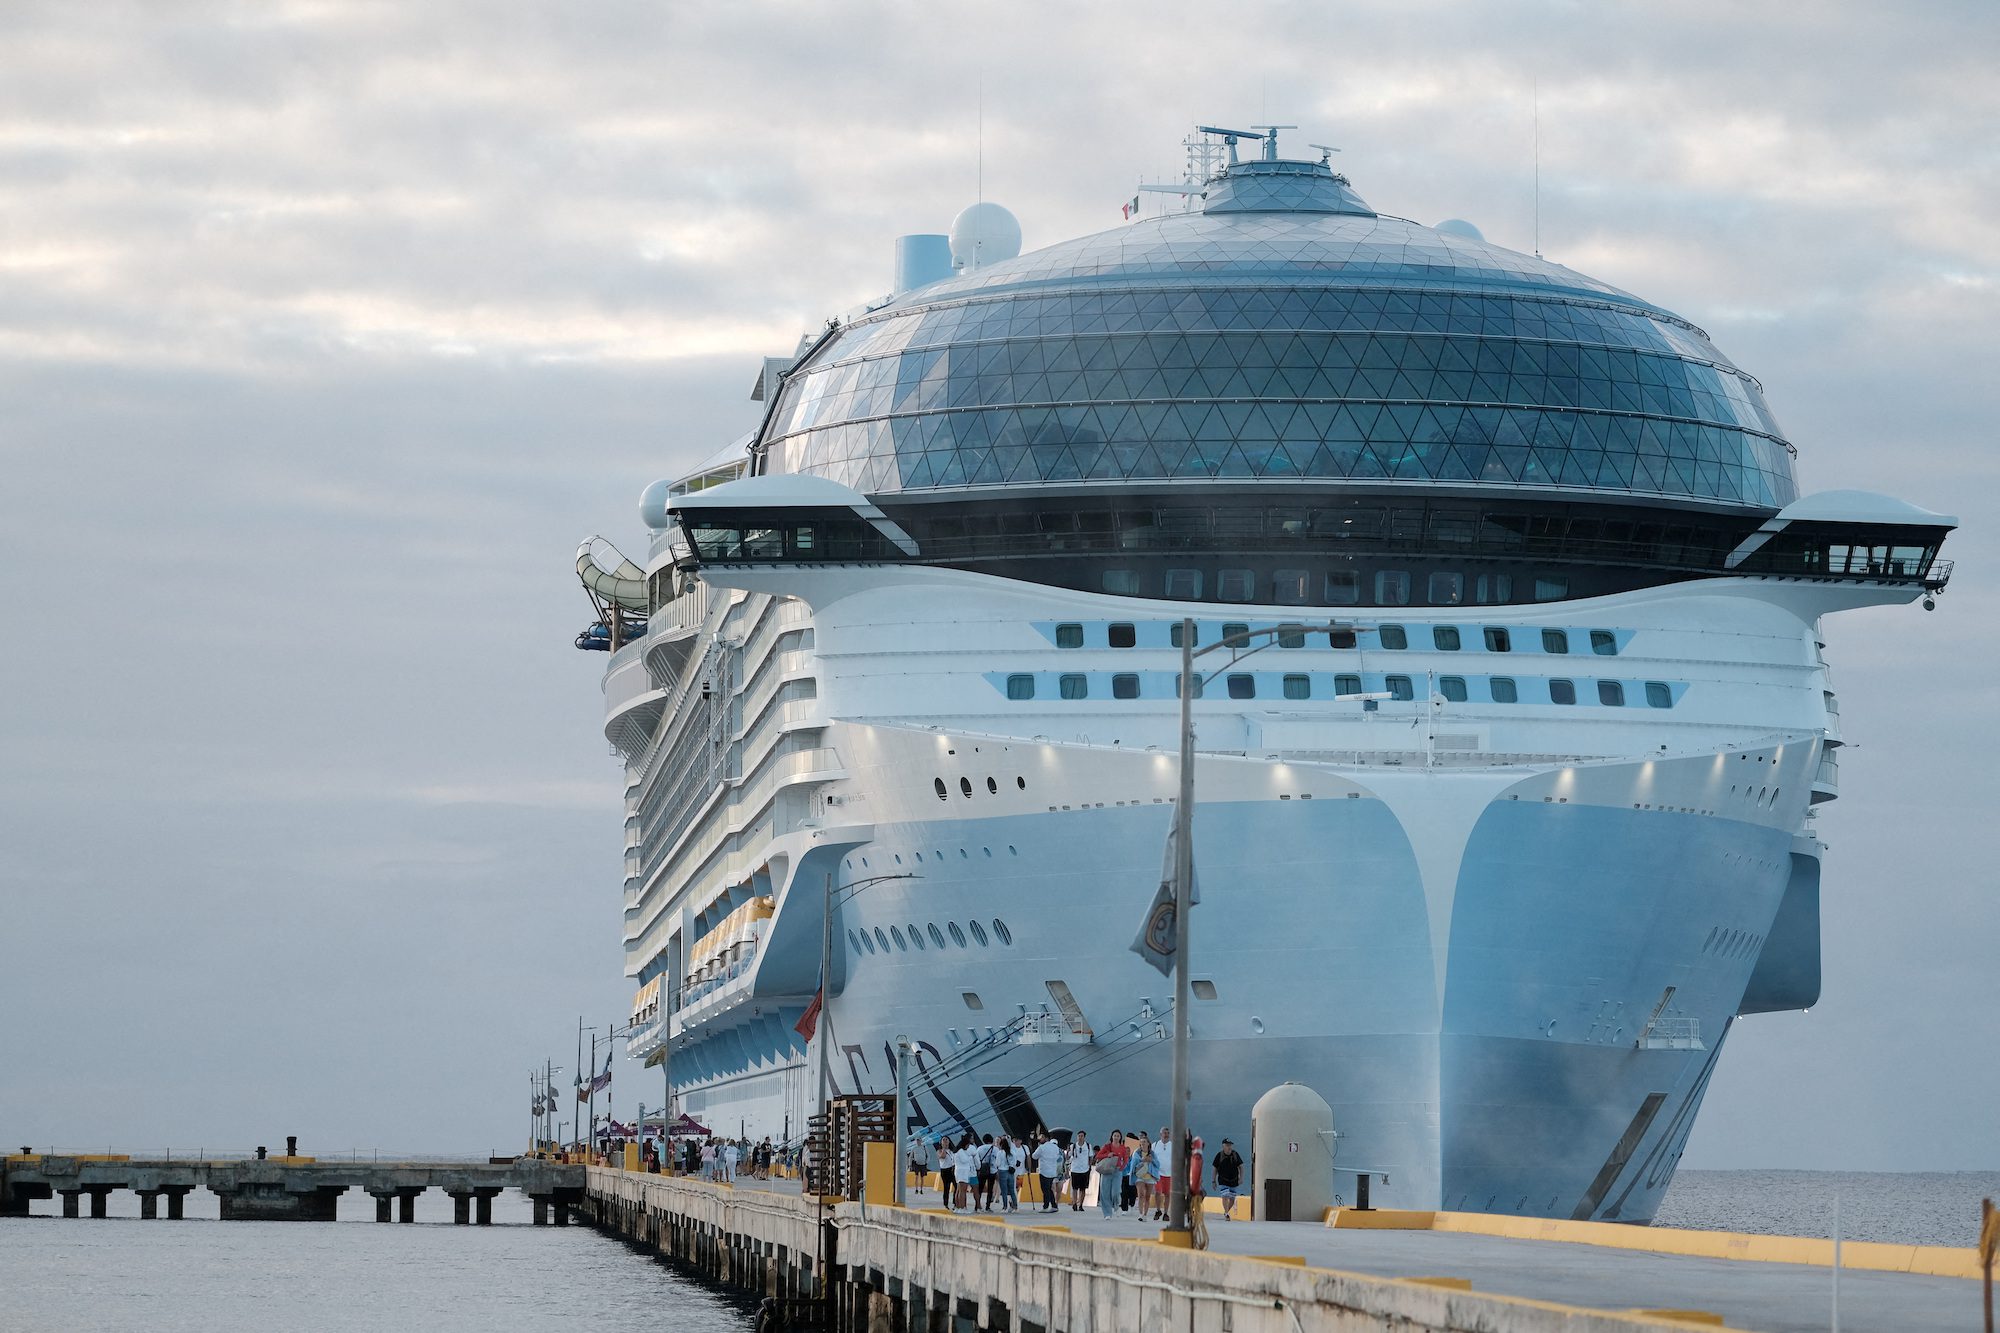 Royal Caribbean Recruiting Thousands to Meet Soaring Cruise Demand, Staff New Ships